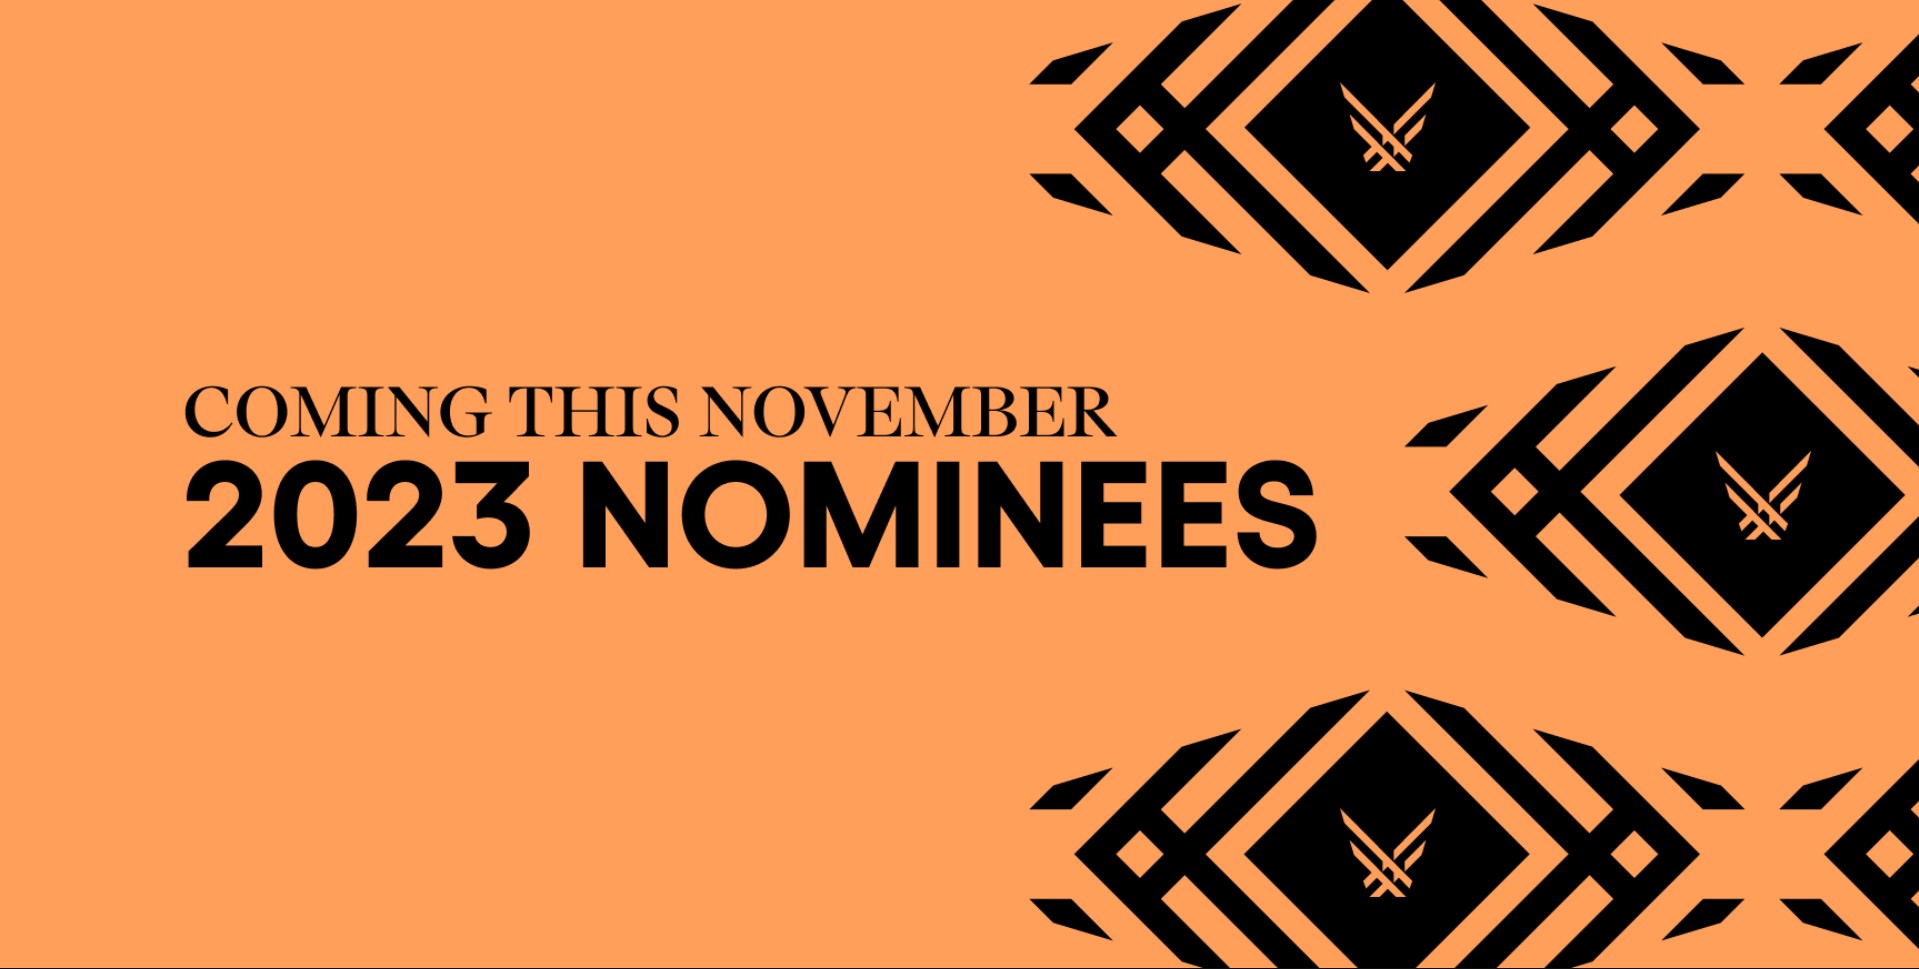 Nominee list for The Game Awards 2023